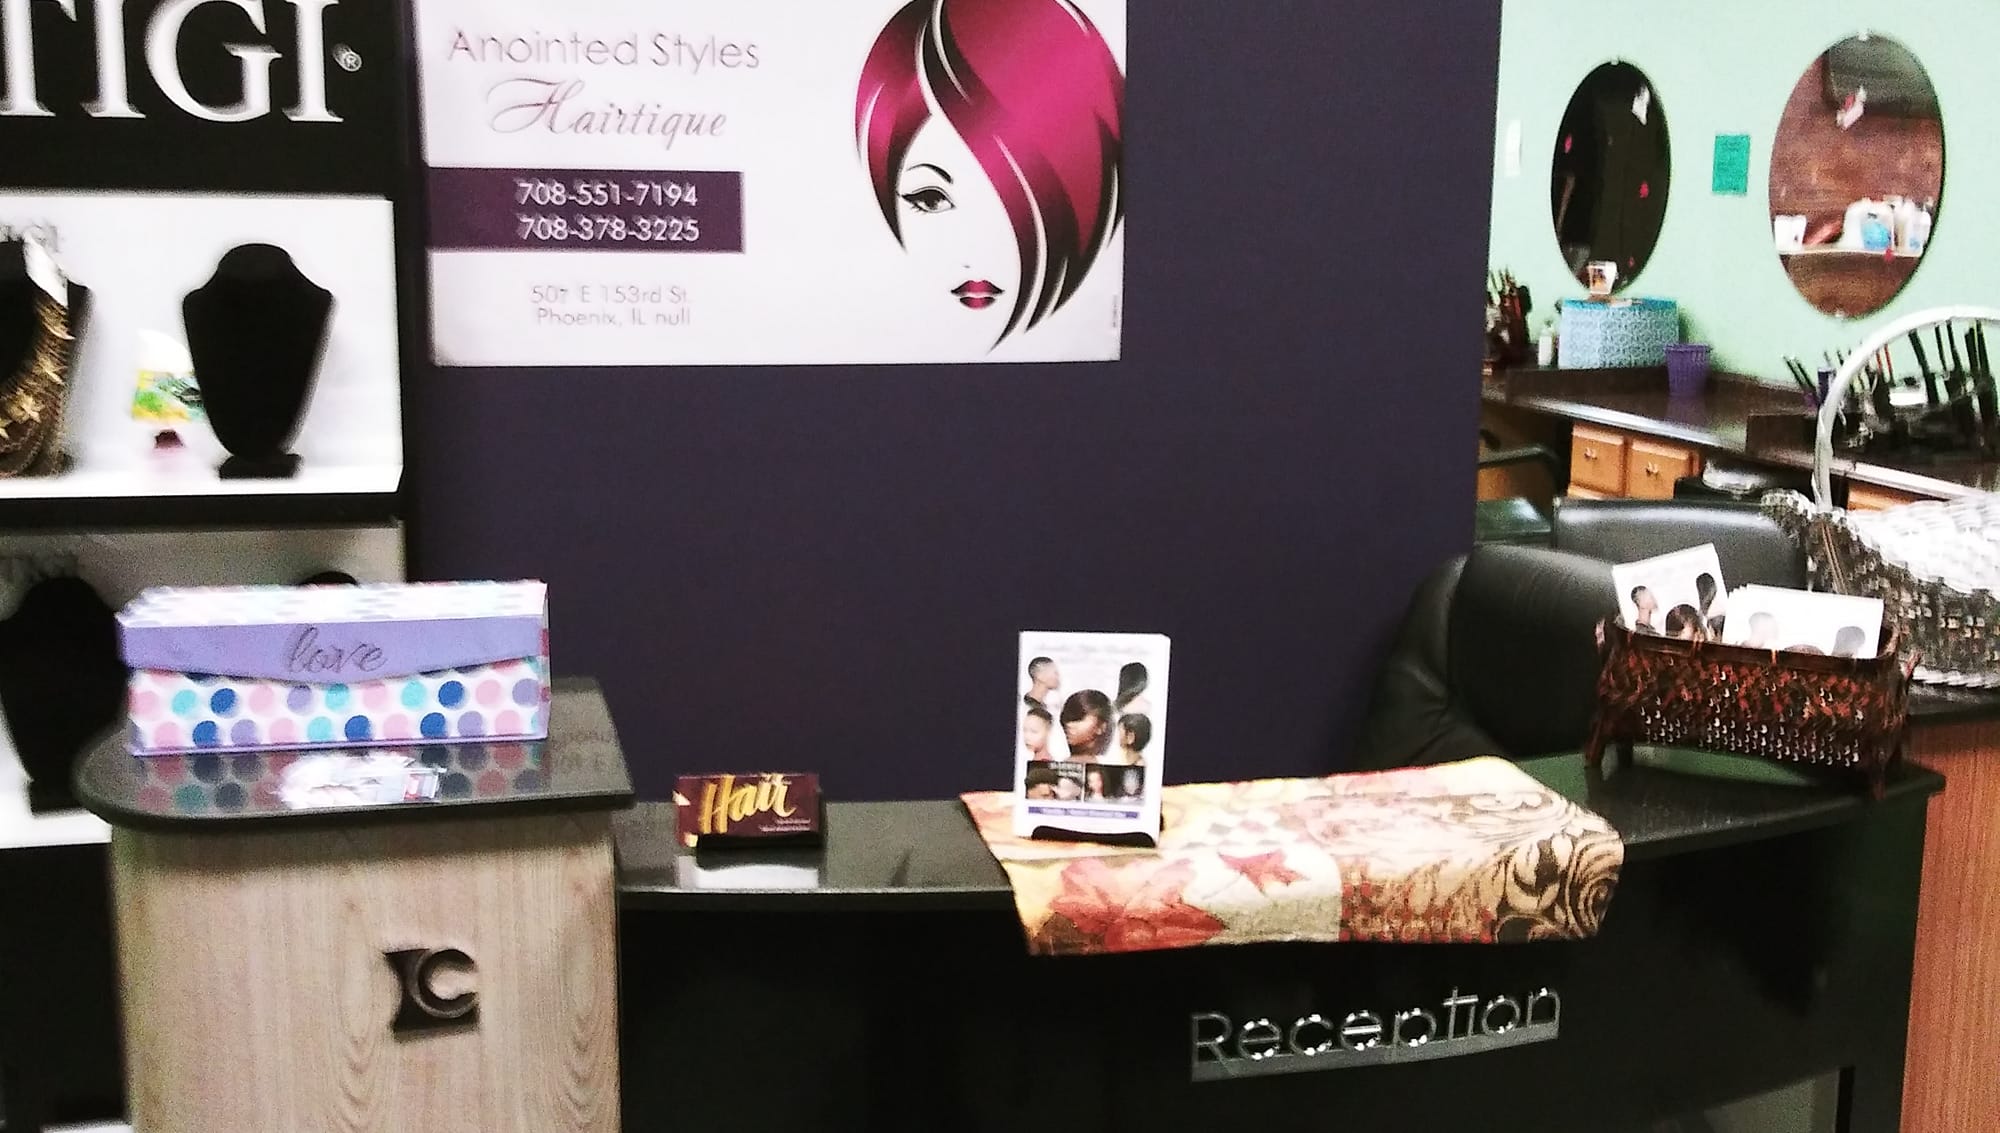 ANOINTED STYLES HAIRTIQUE 1817 West 170th Street, Hazel Crest Illinois 60429